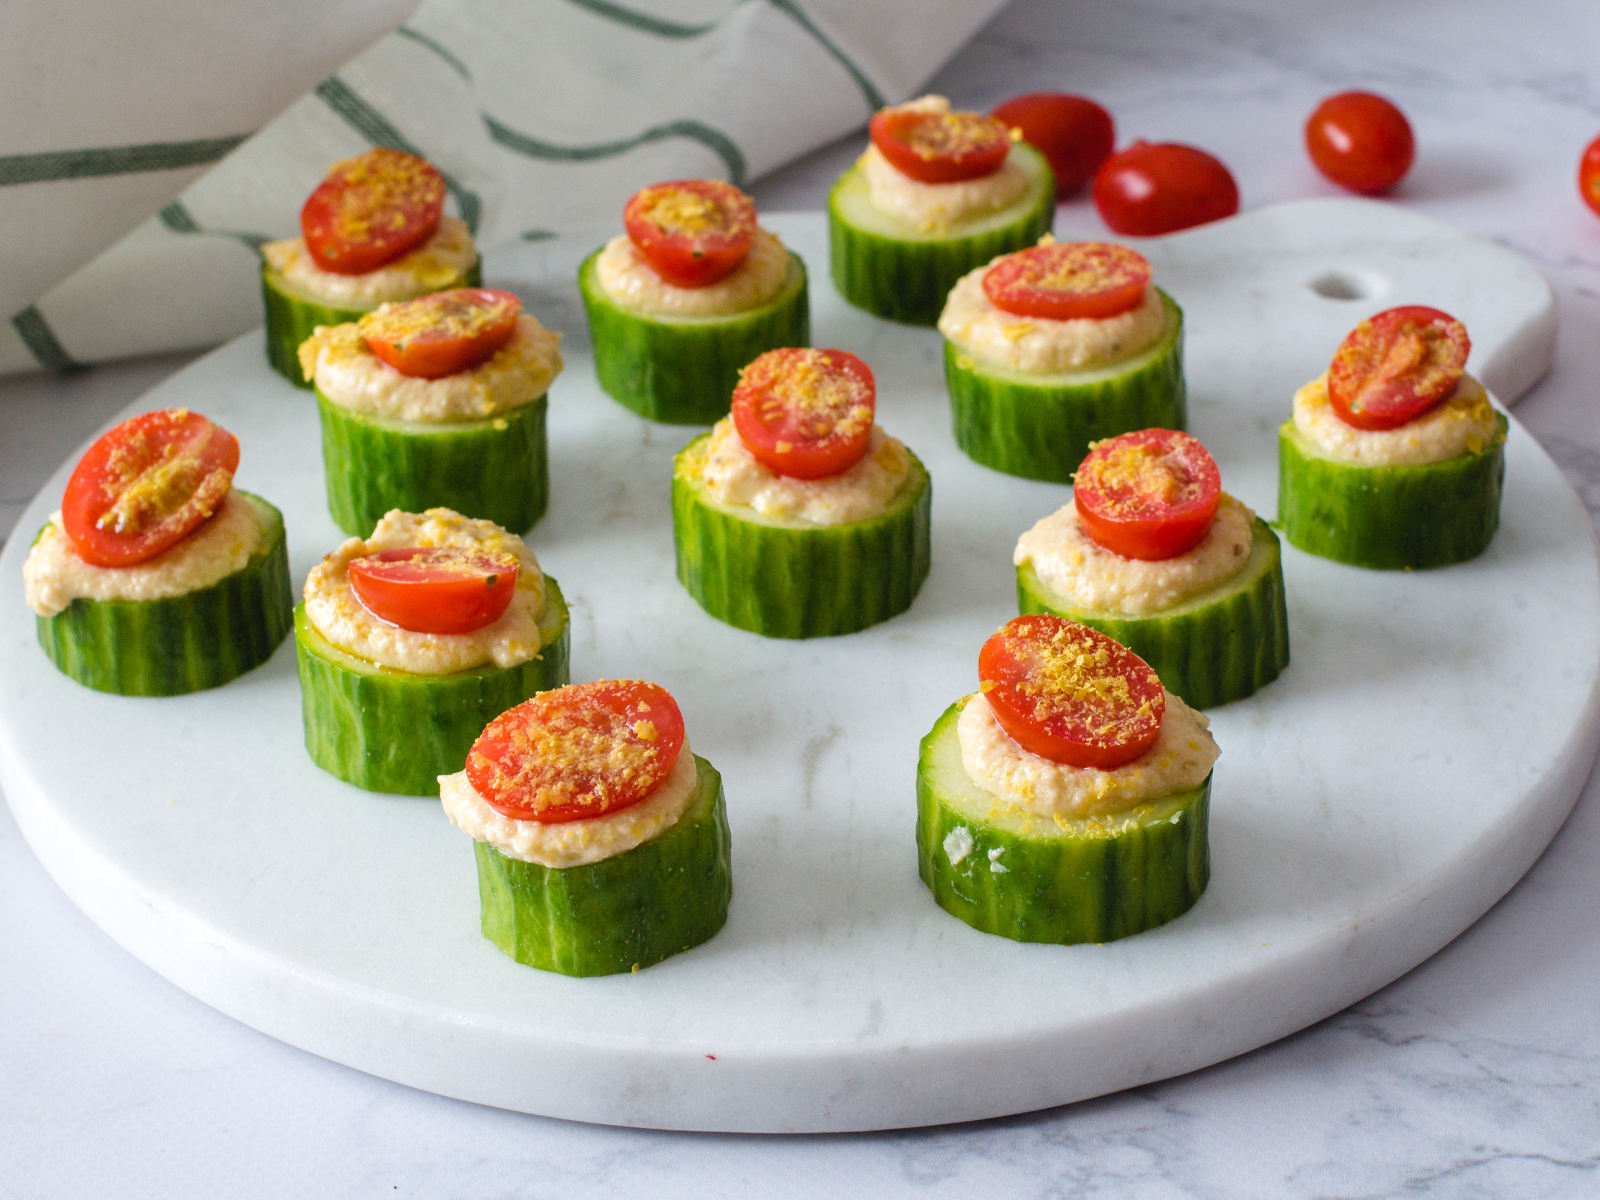 cucumber bites with dip or salad and sliced tomatoes